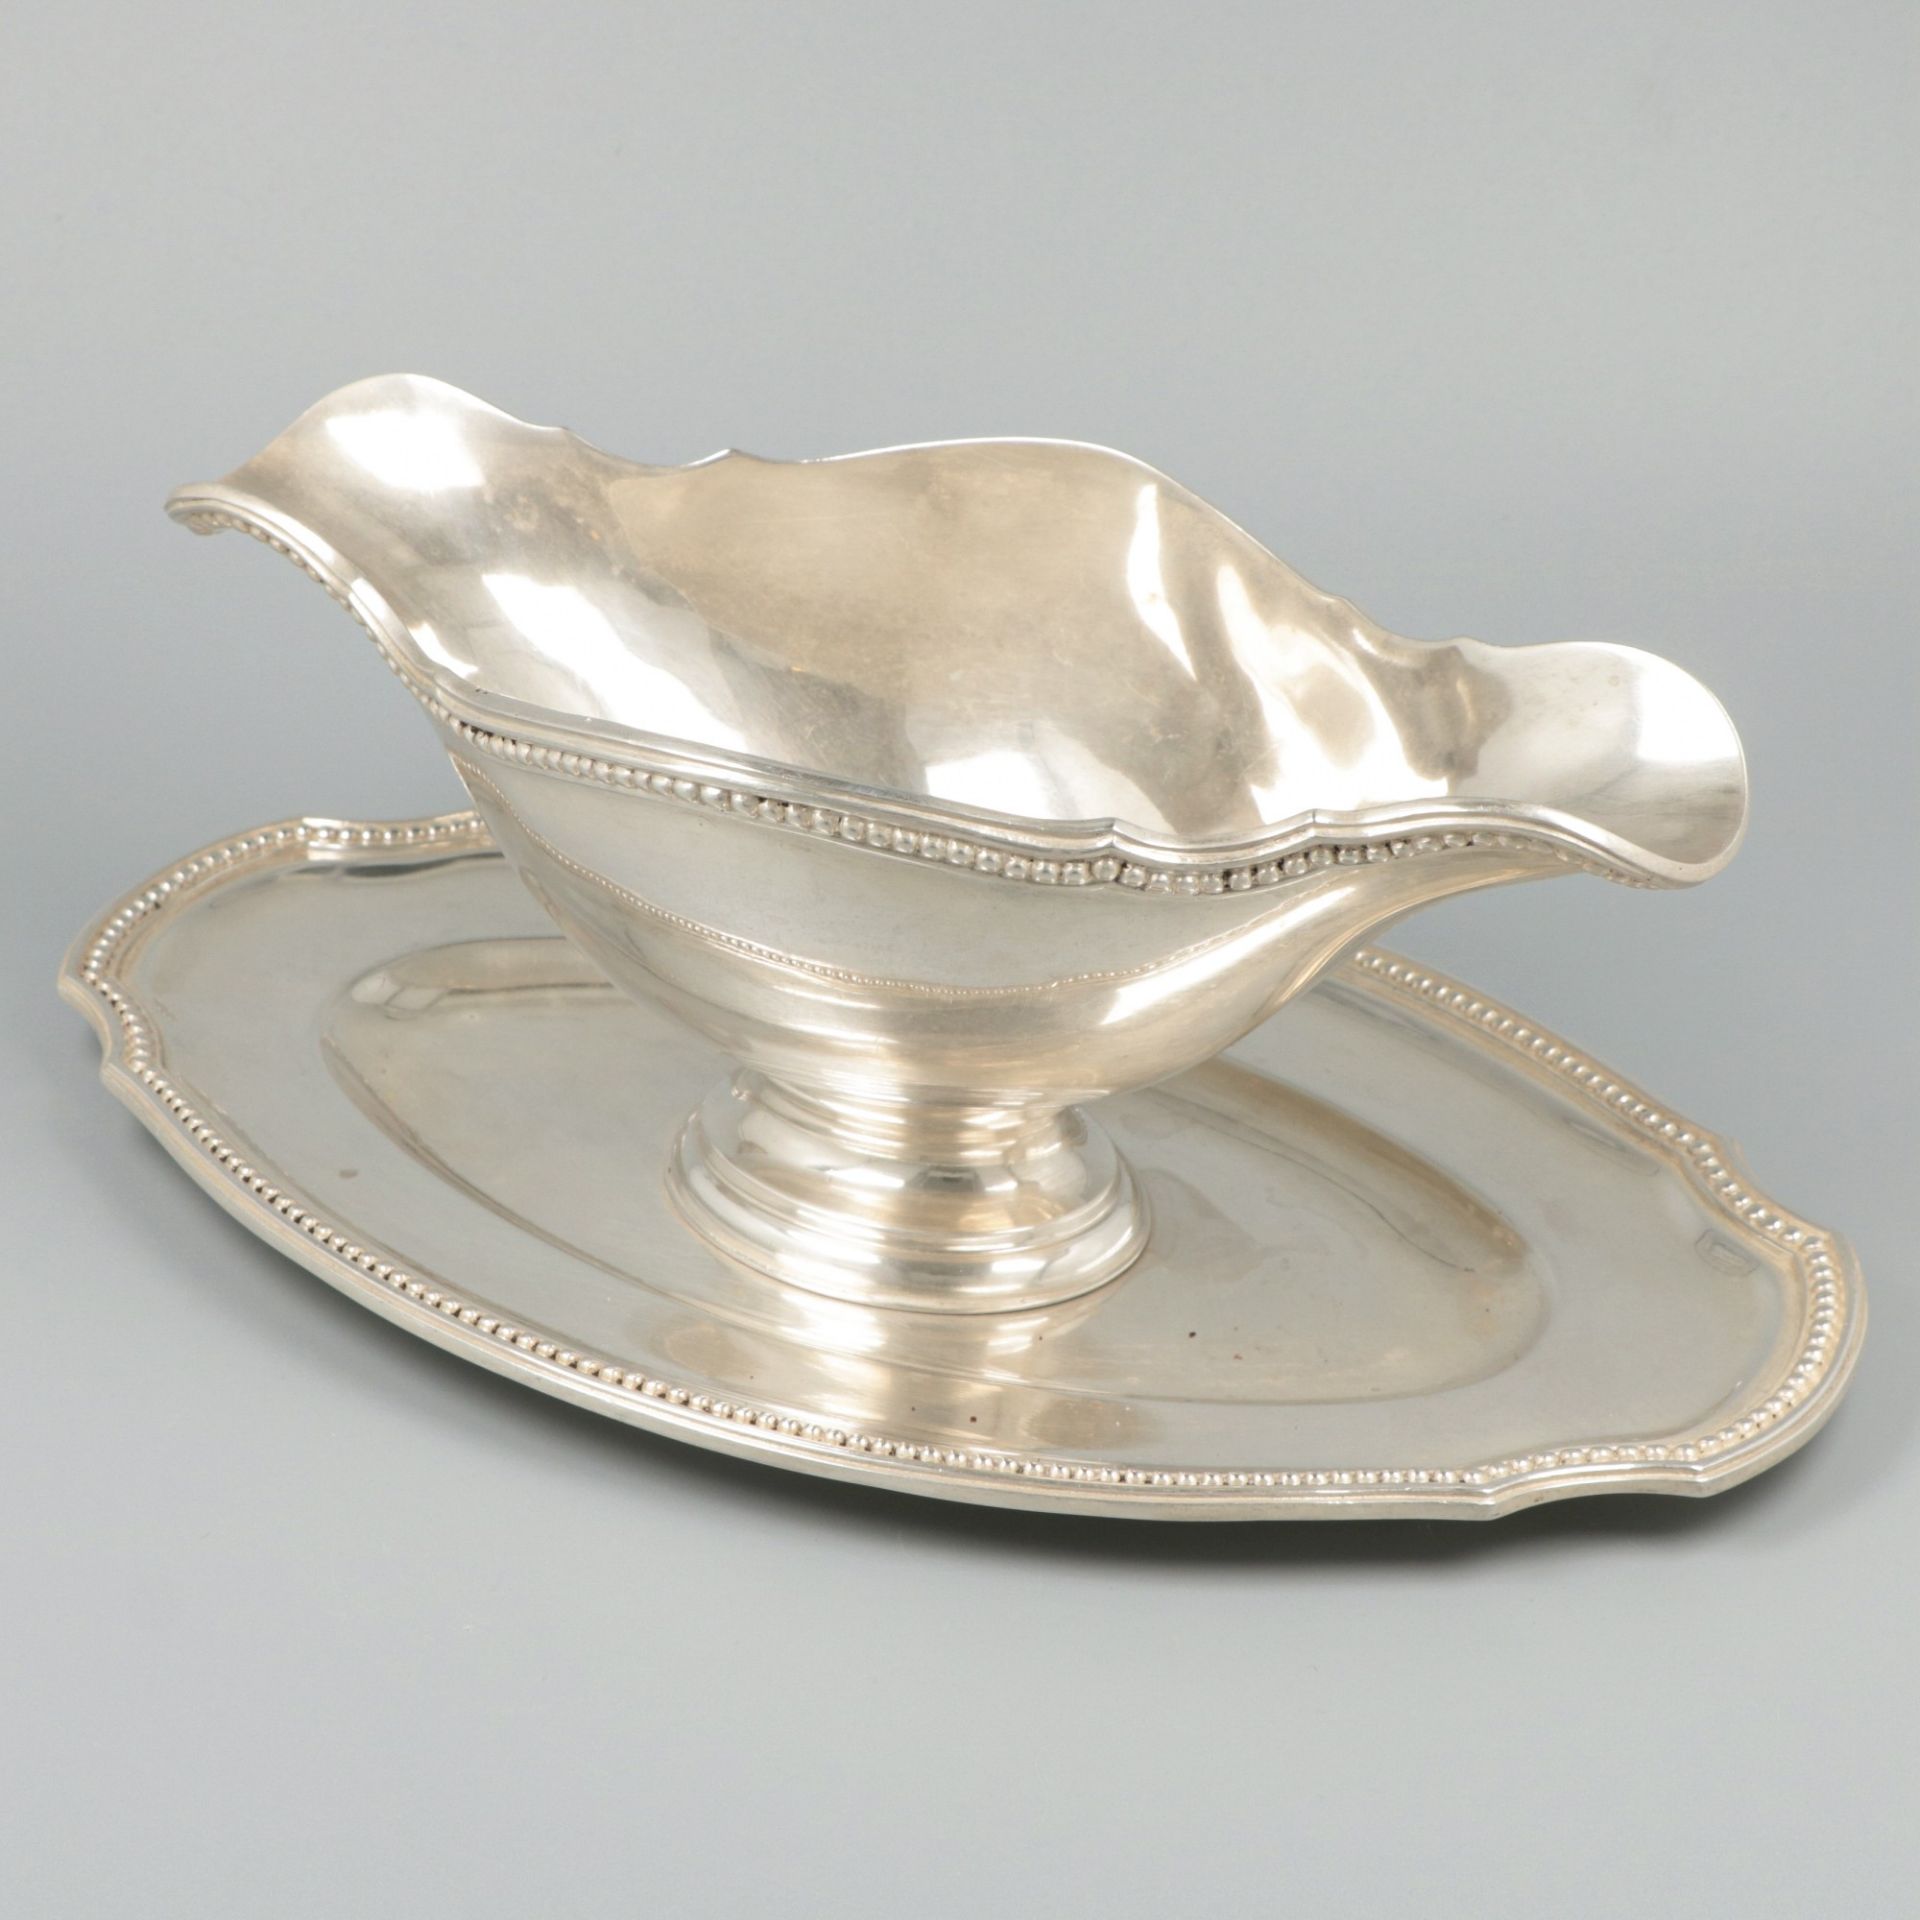 Saucière / sauce boat silver. - Image 2 of 5